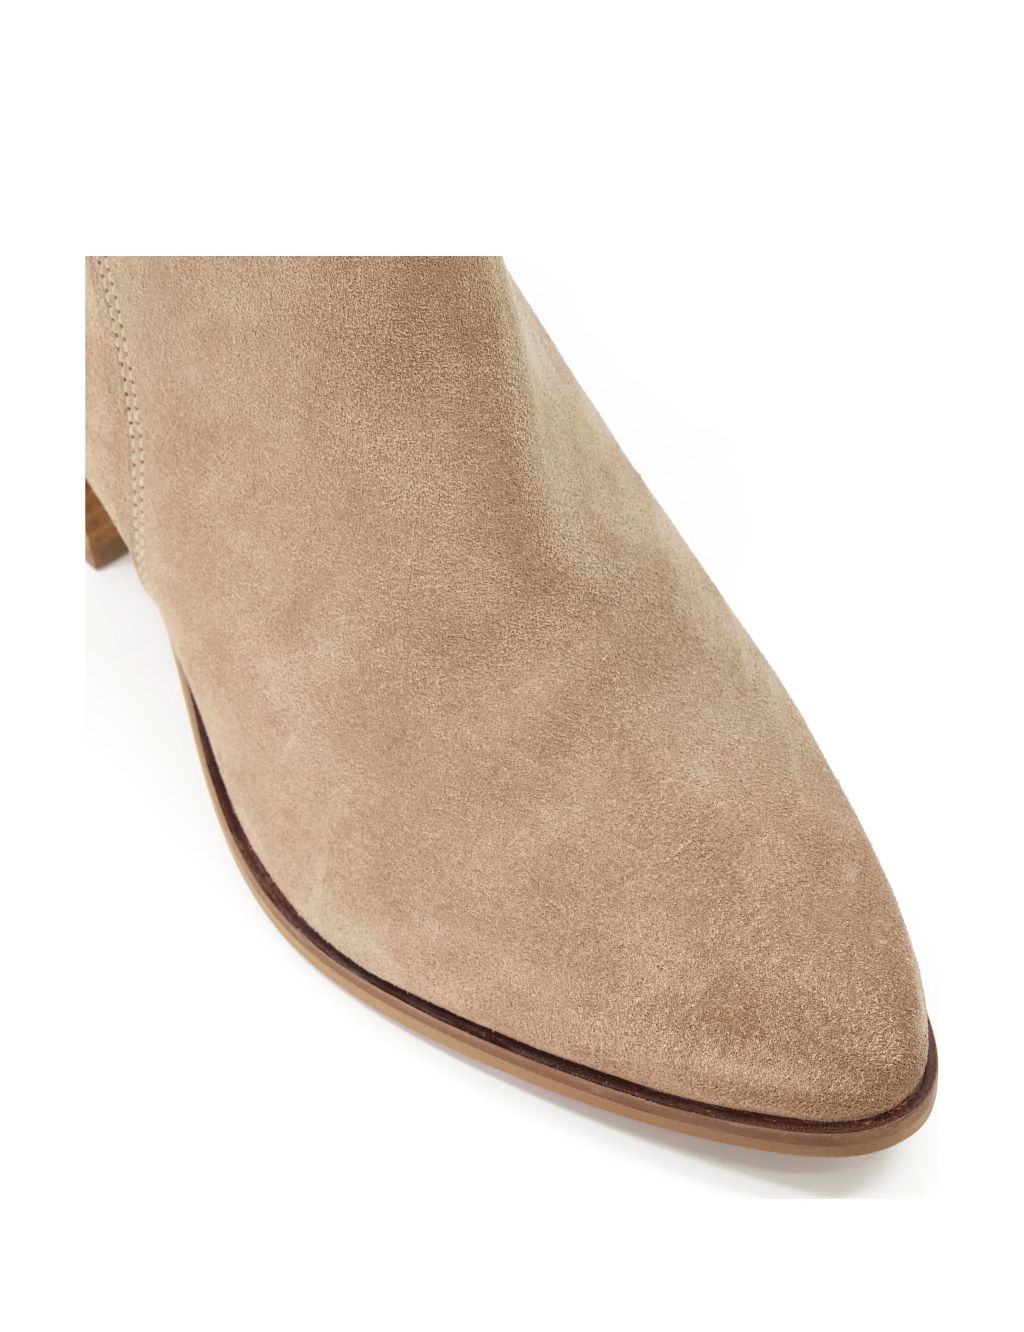 Wide Fit Suede Block Heel Ankle Boots image 3